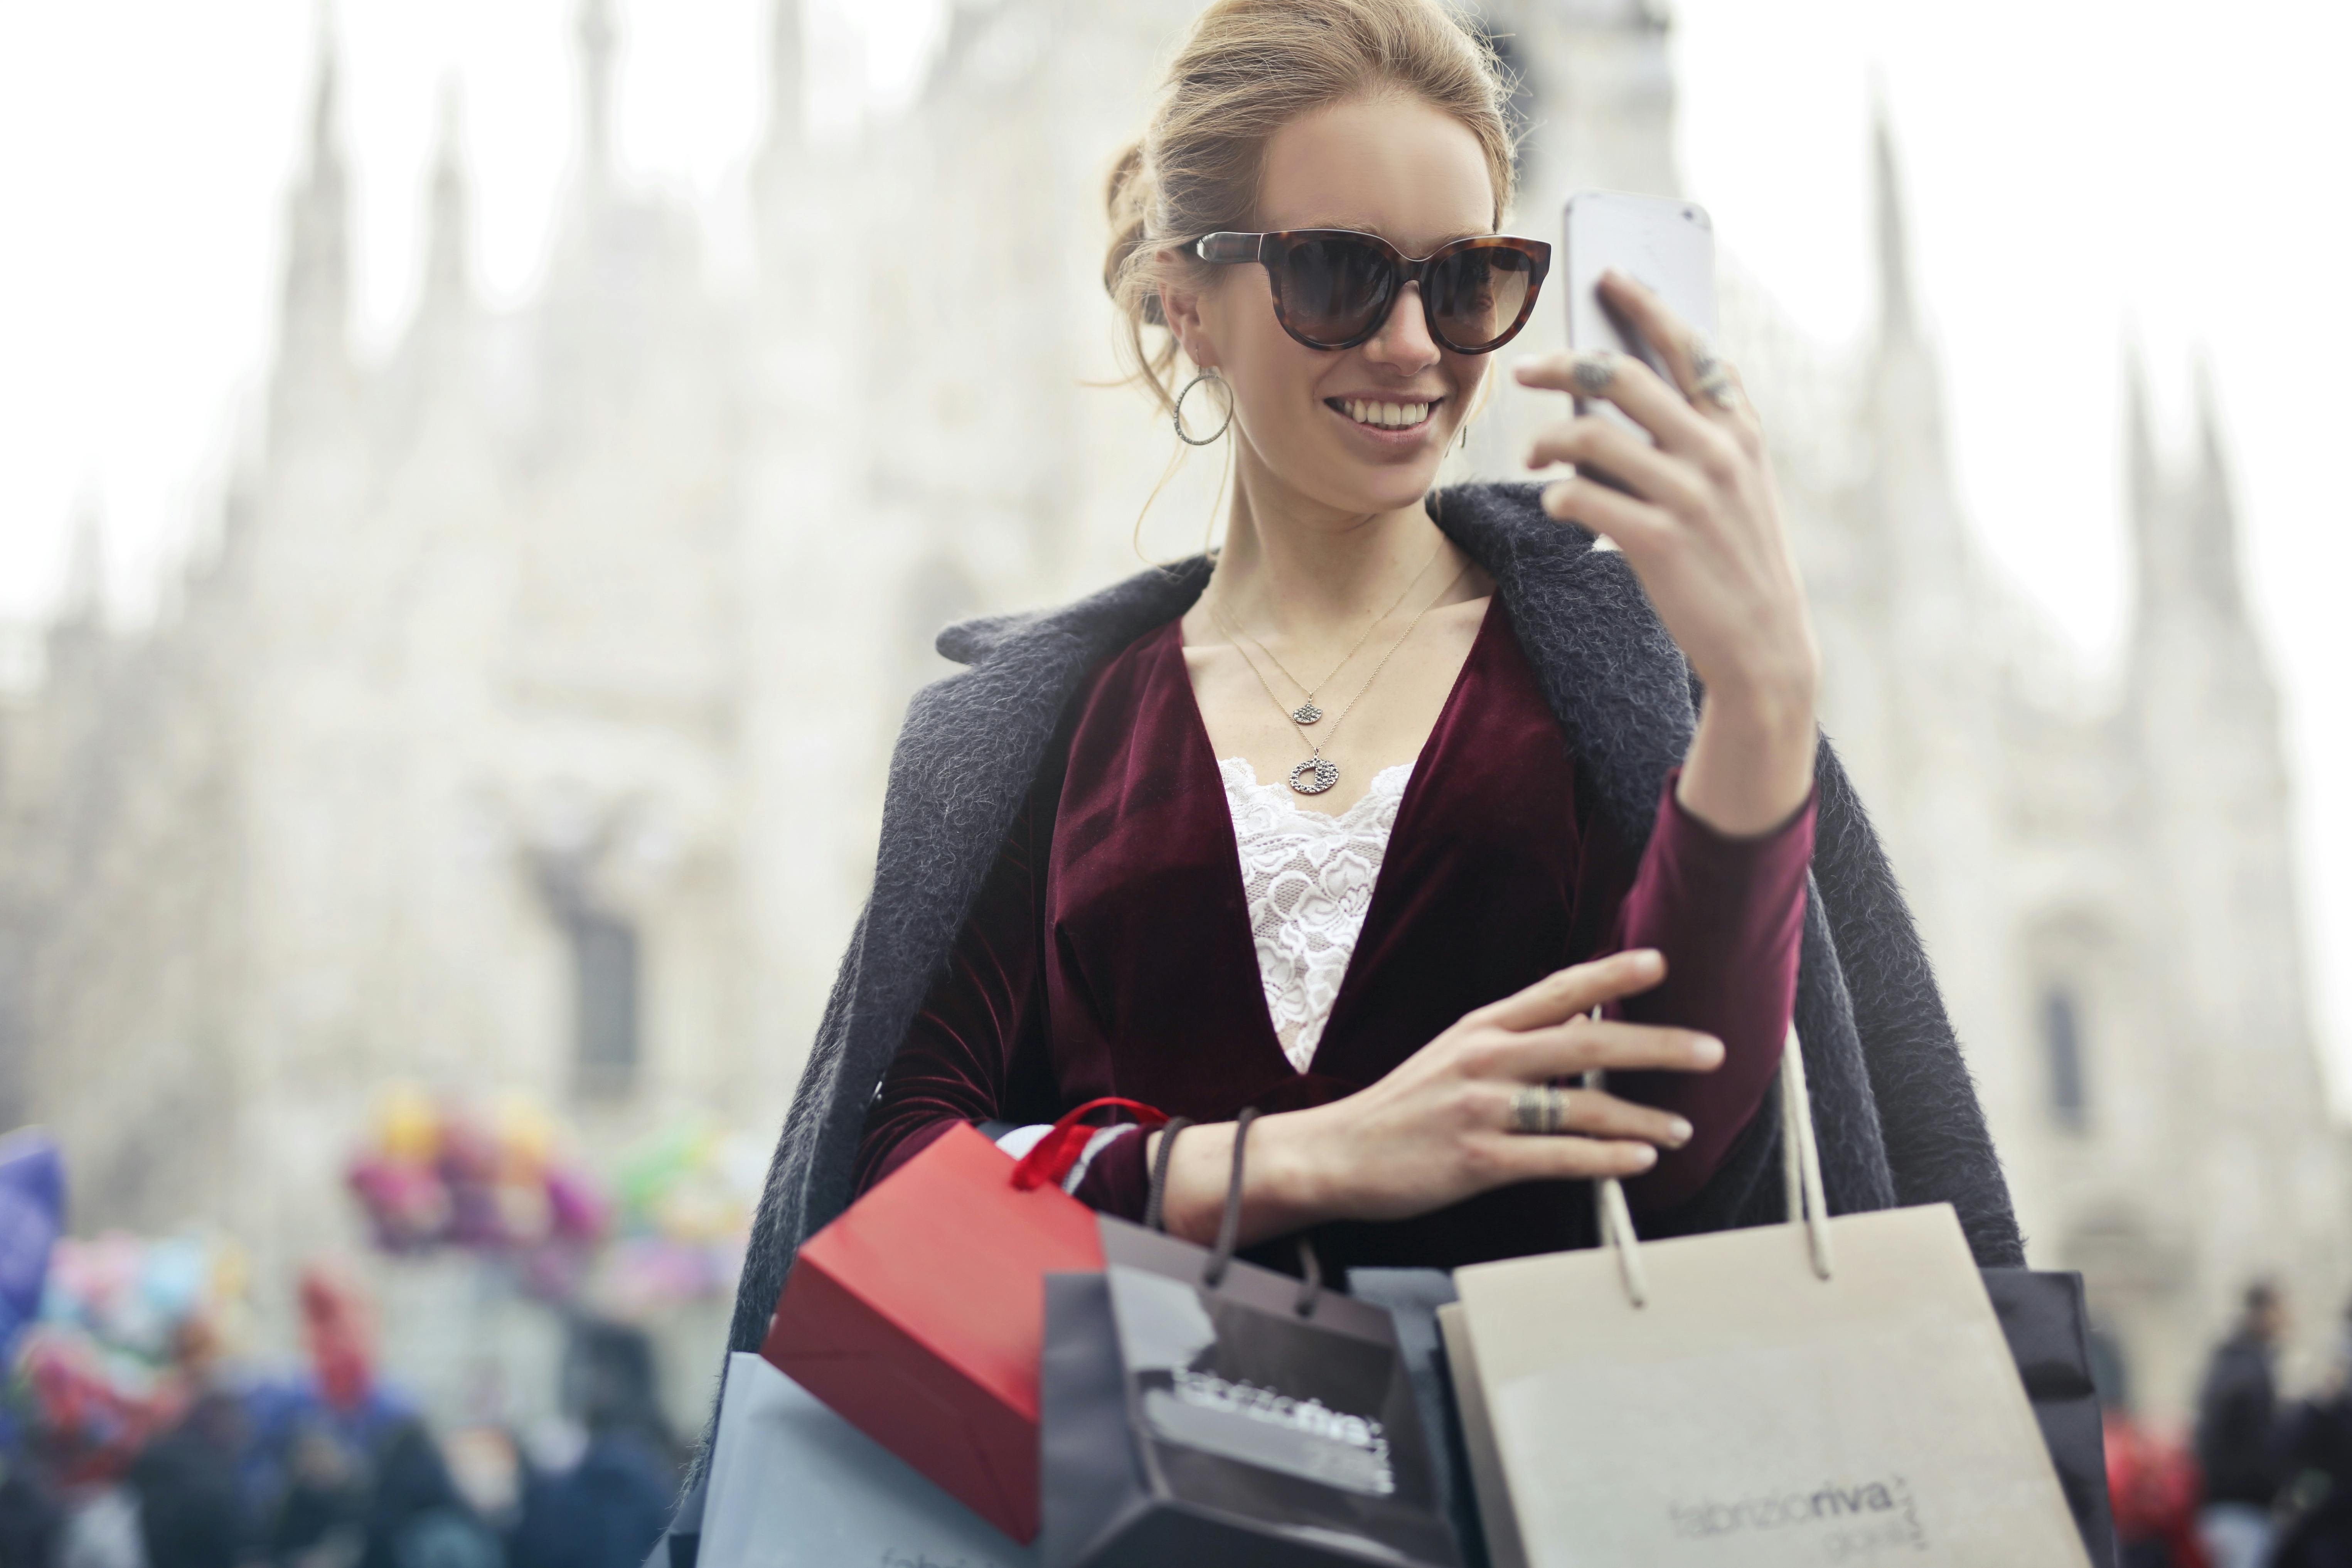 A wealthy woman wearing sunglasses, holding shopping bags, and looking at her phone | Source: Pexels